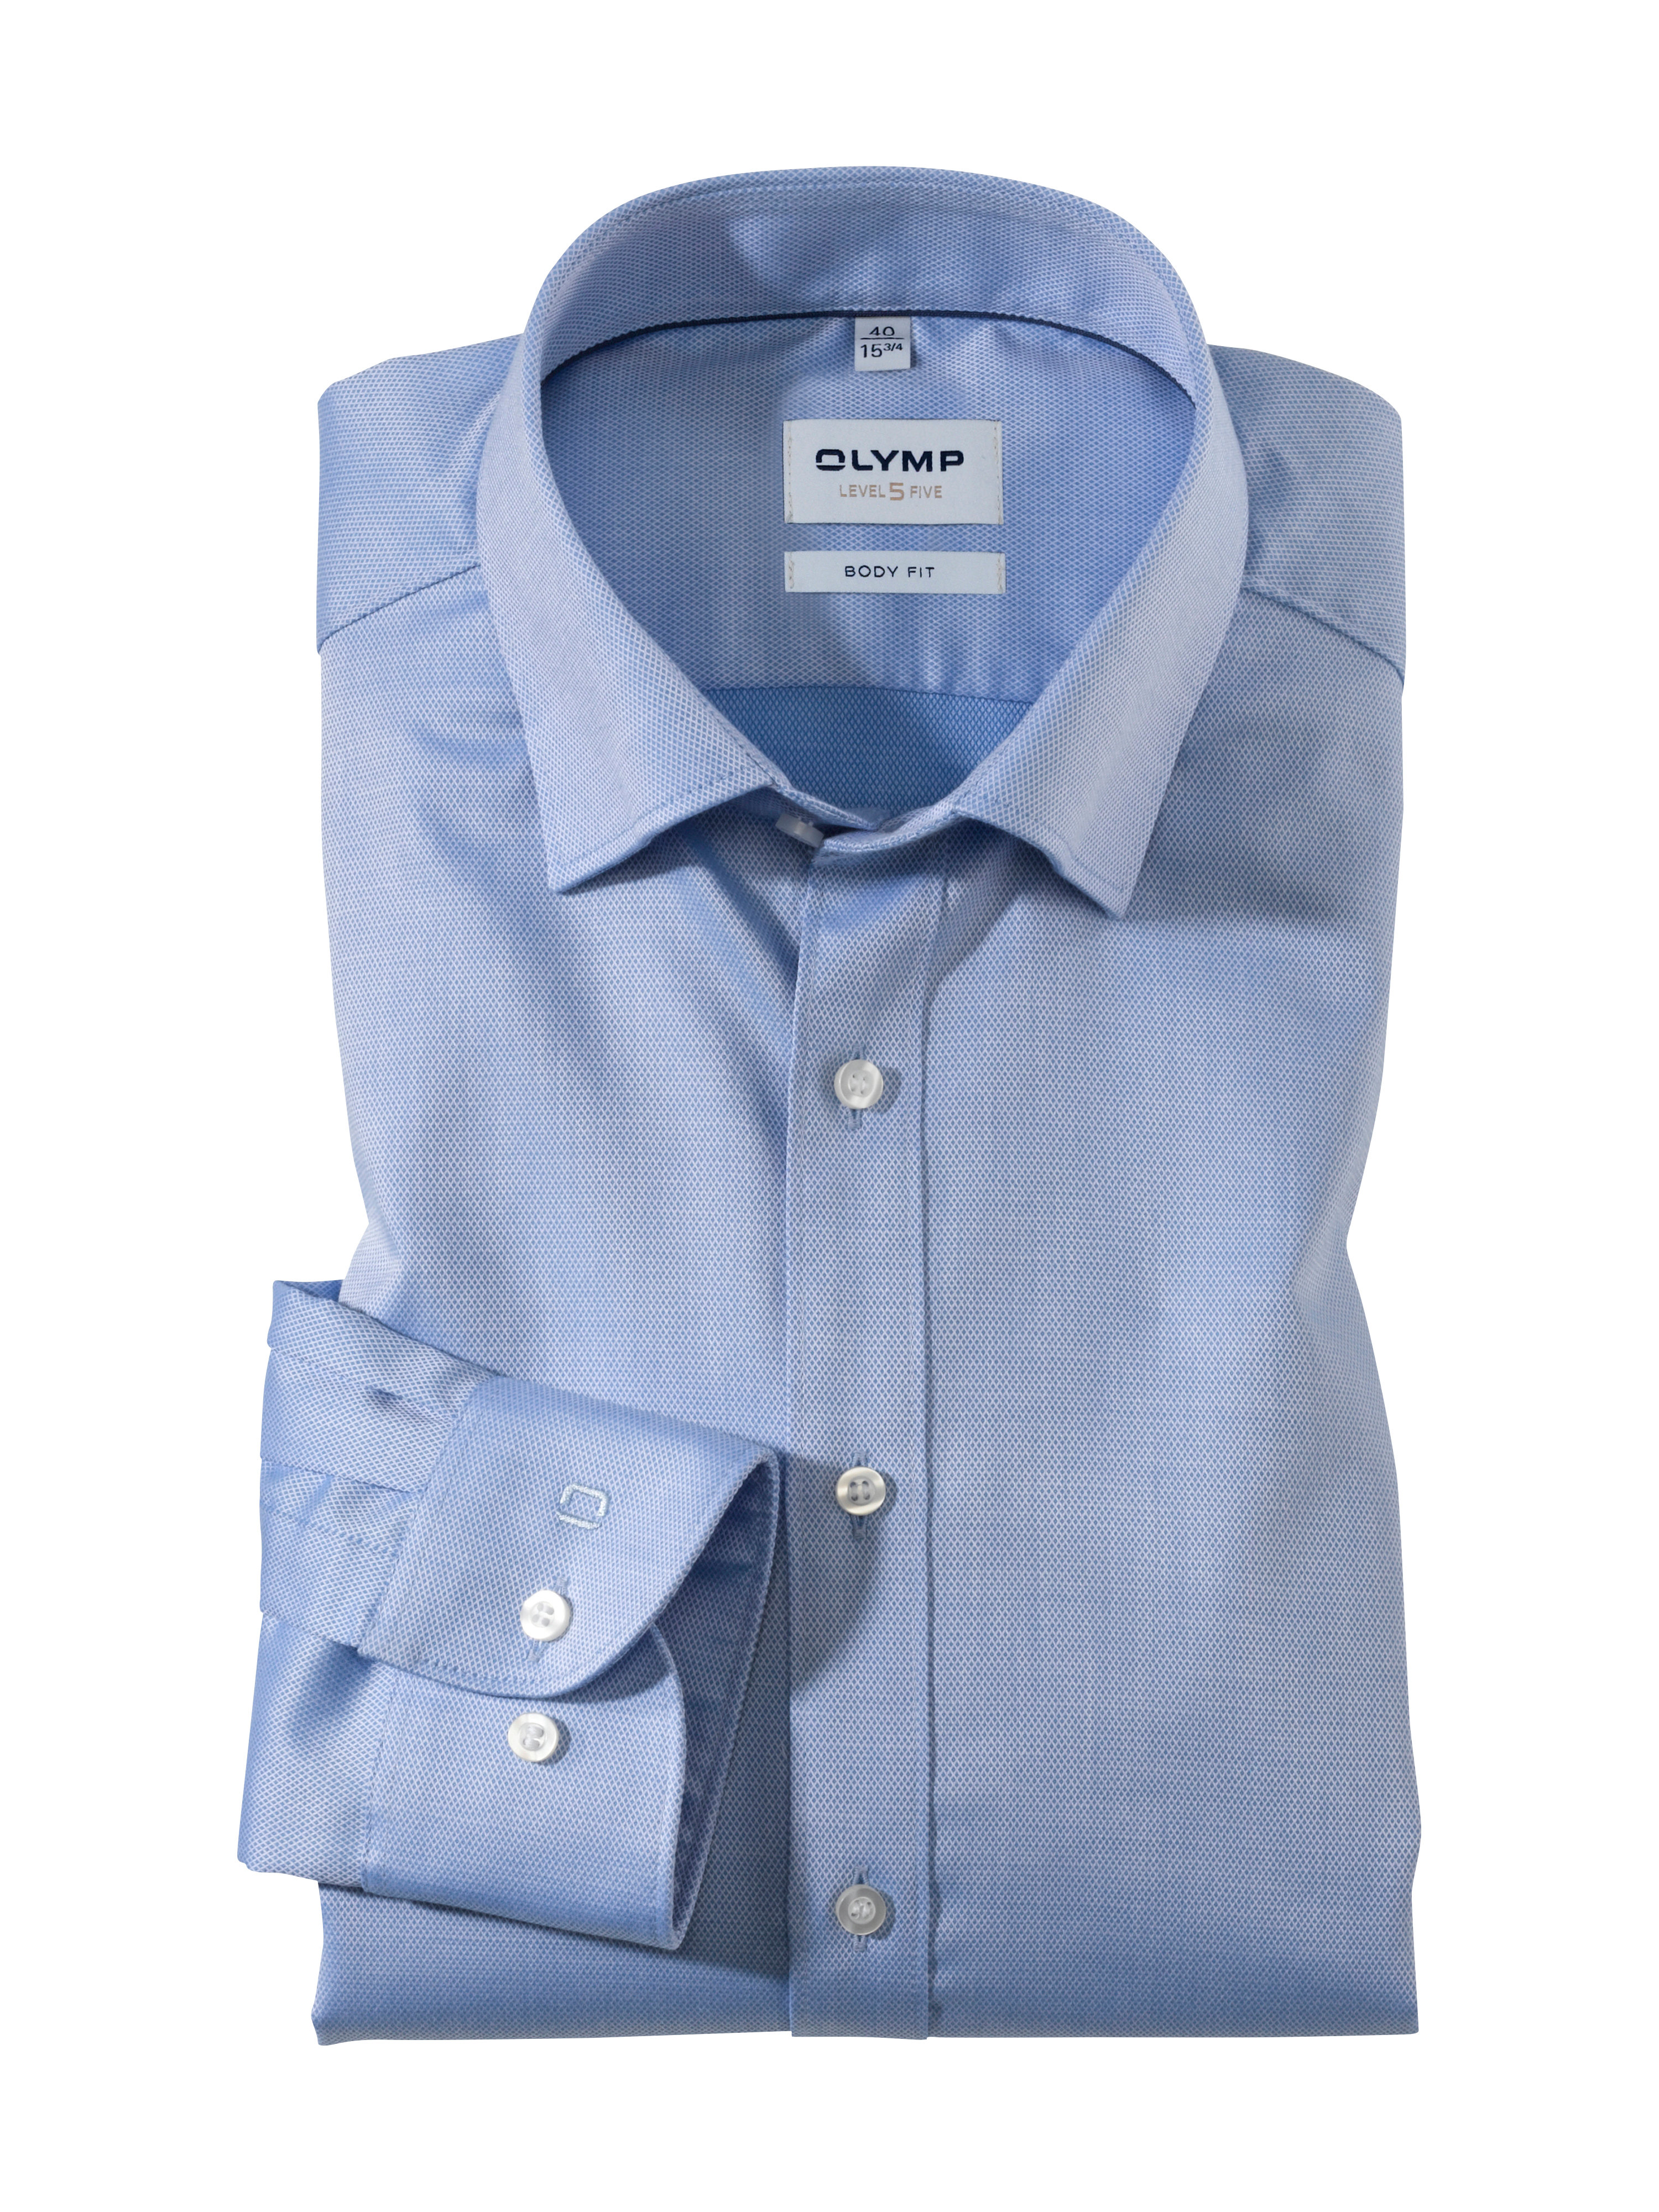 Blue shirt Level Five, Under | Business body OLYMP button-down | - 04646415 fit,